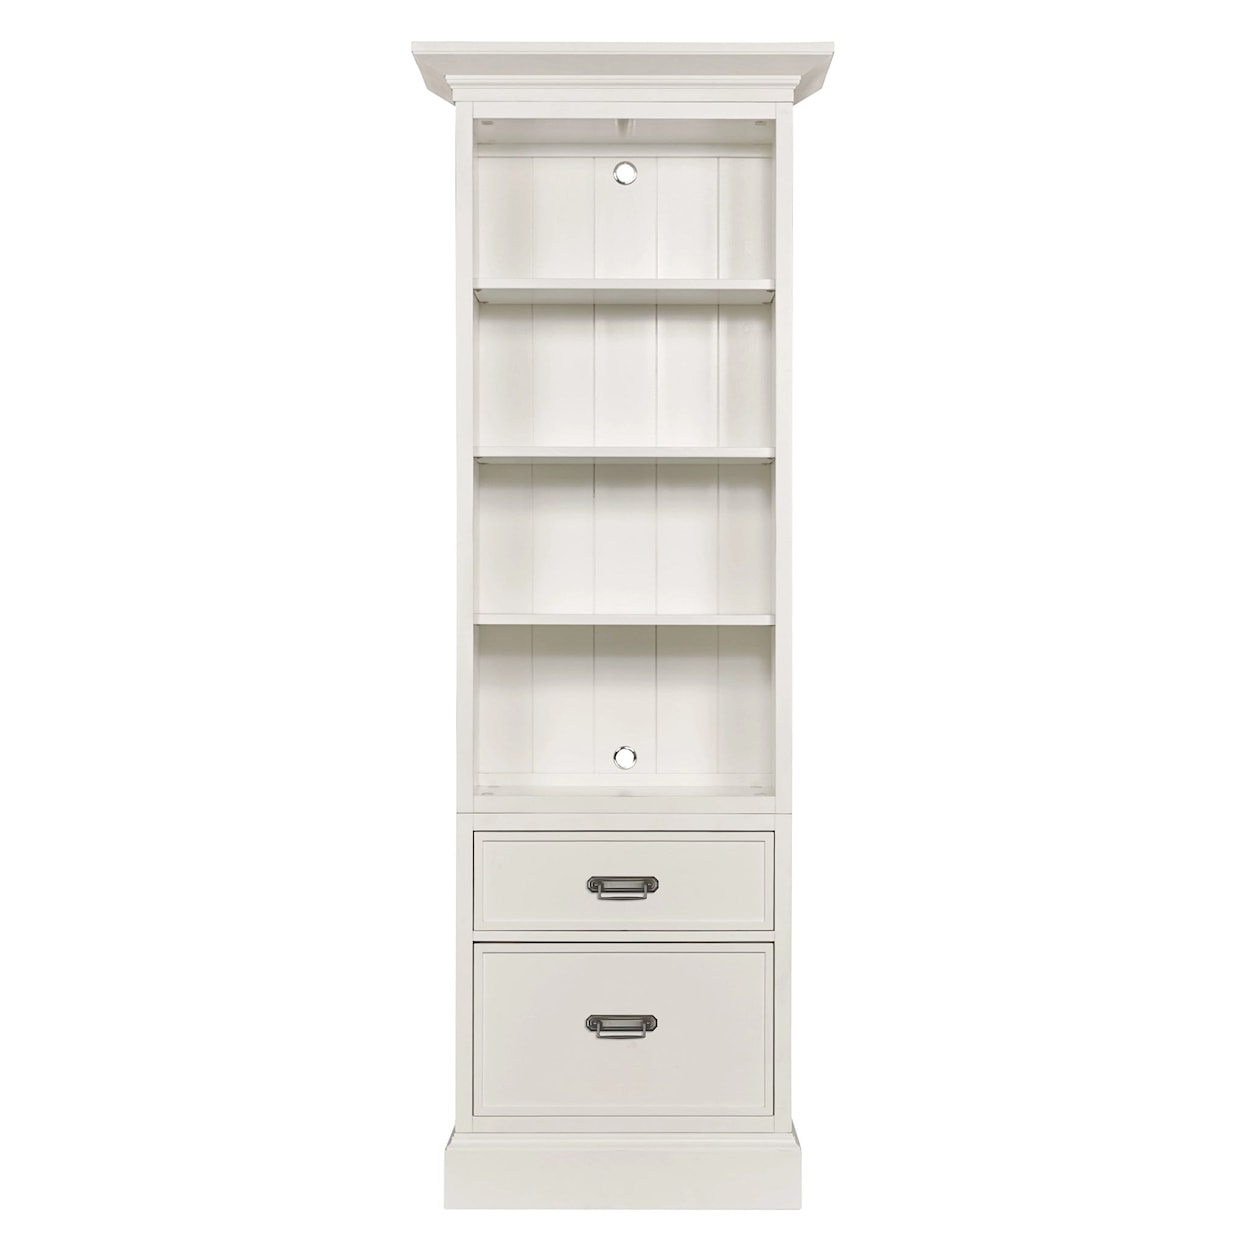 Hammary Structures Single Storage Bookcase Cabinet